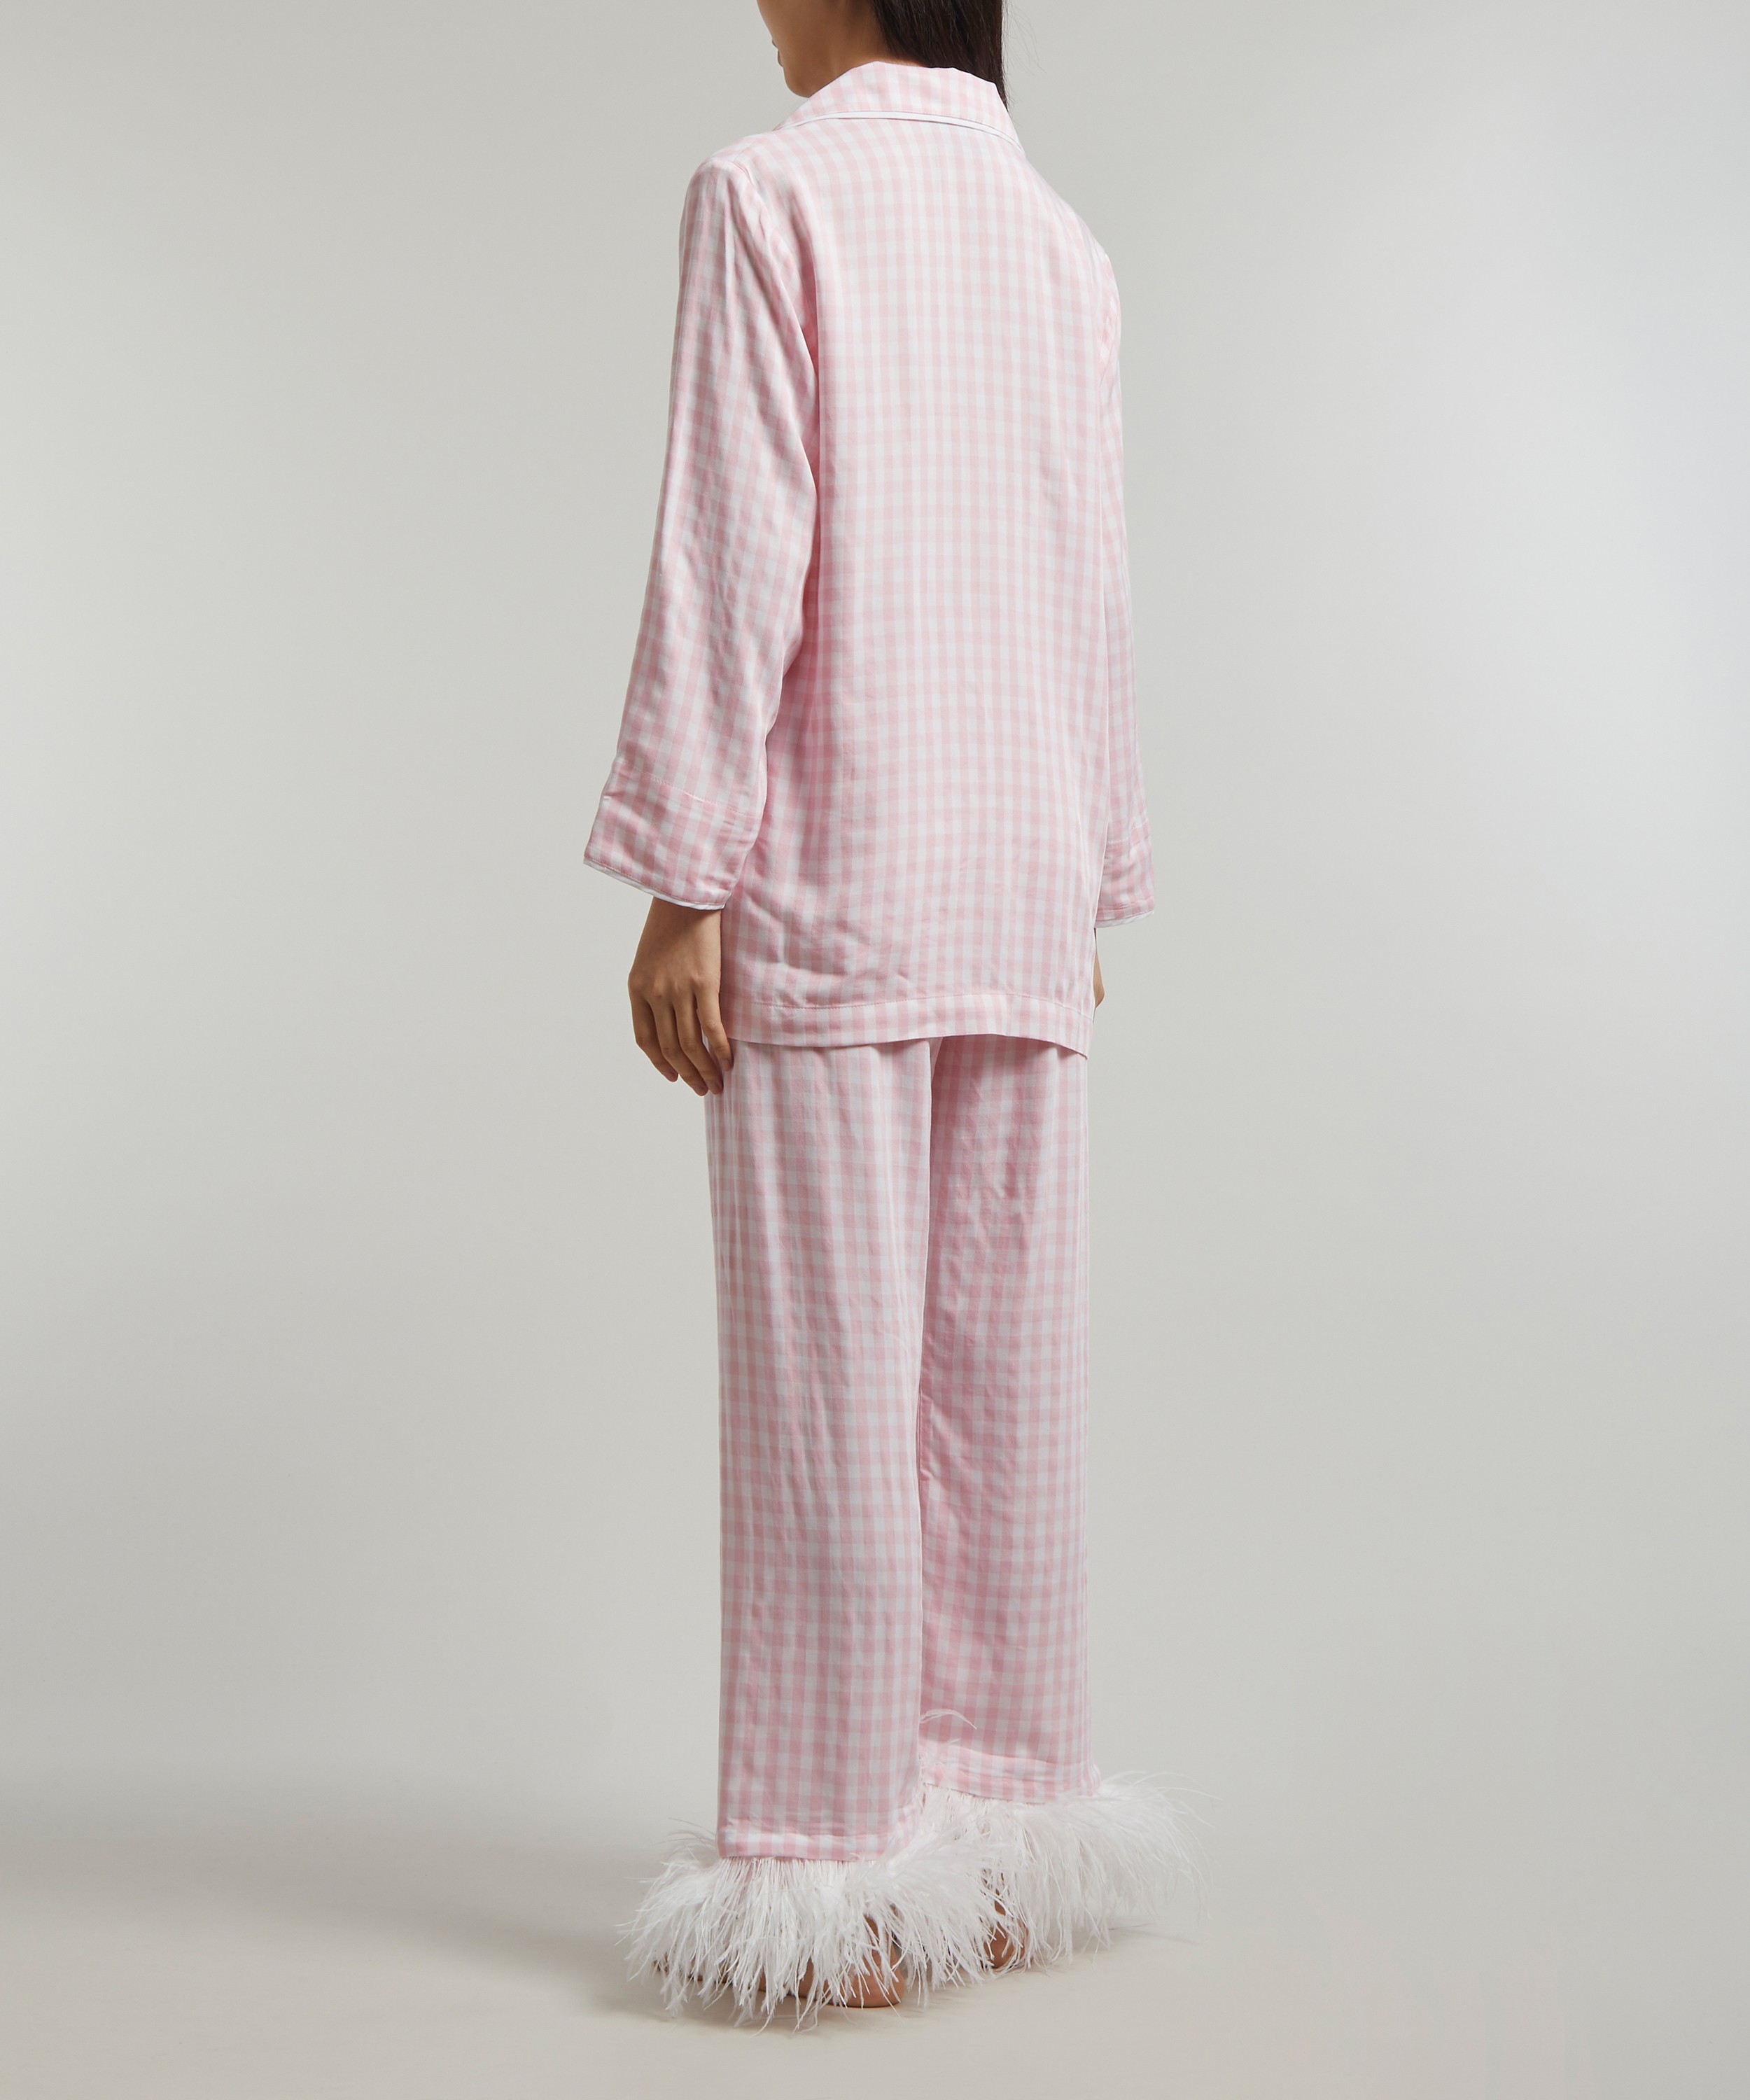 Sleeper Party Pajama with Detachable Feathers in Pink Stripes